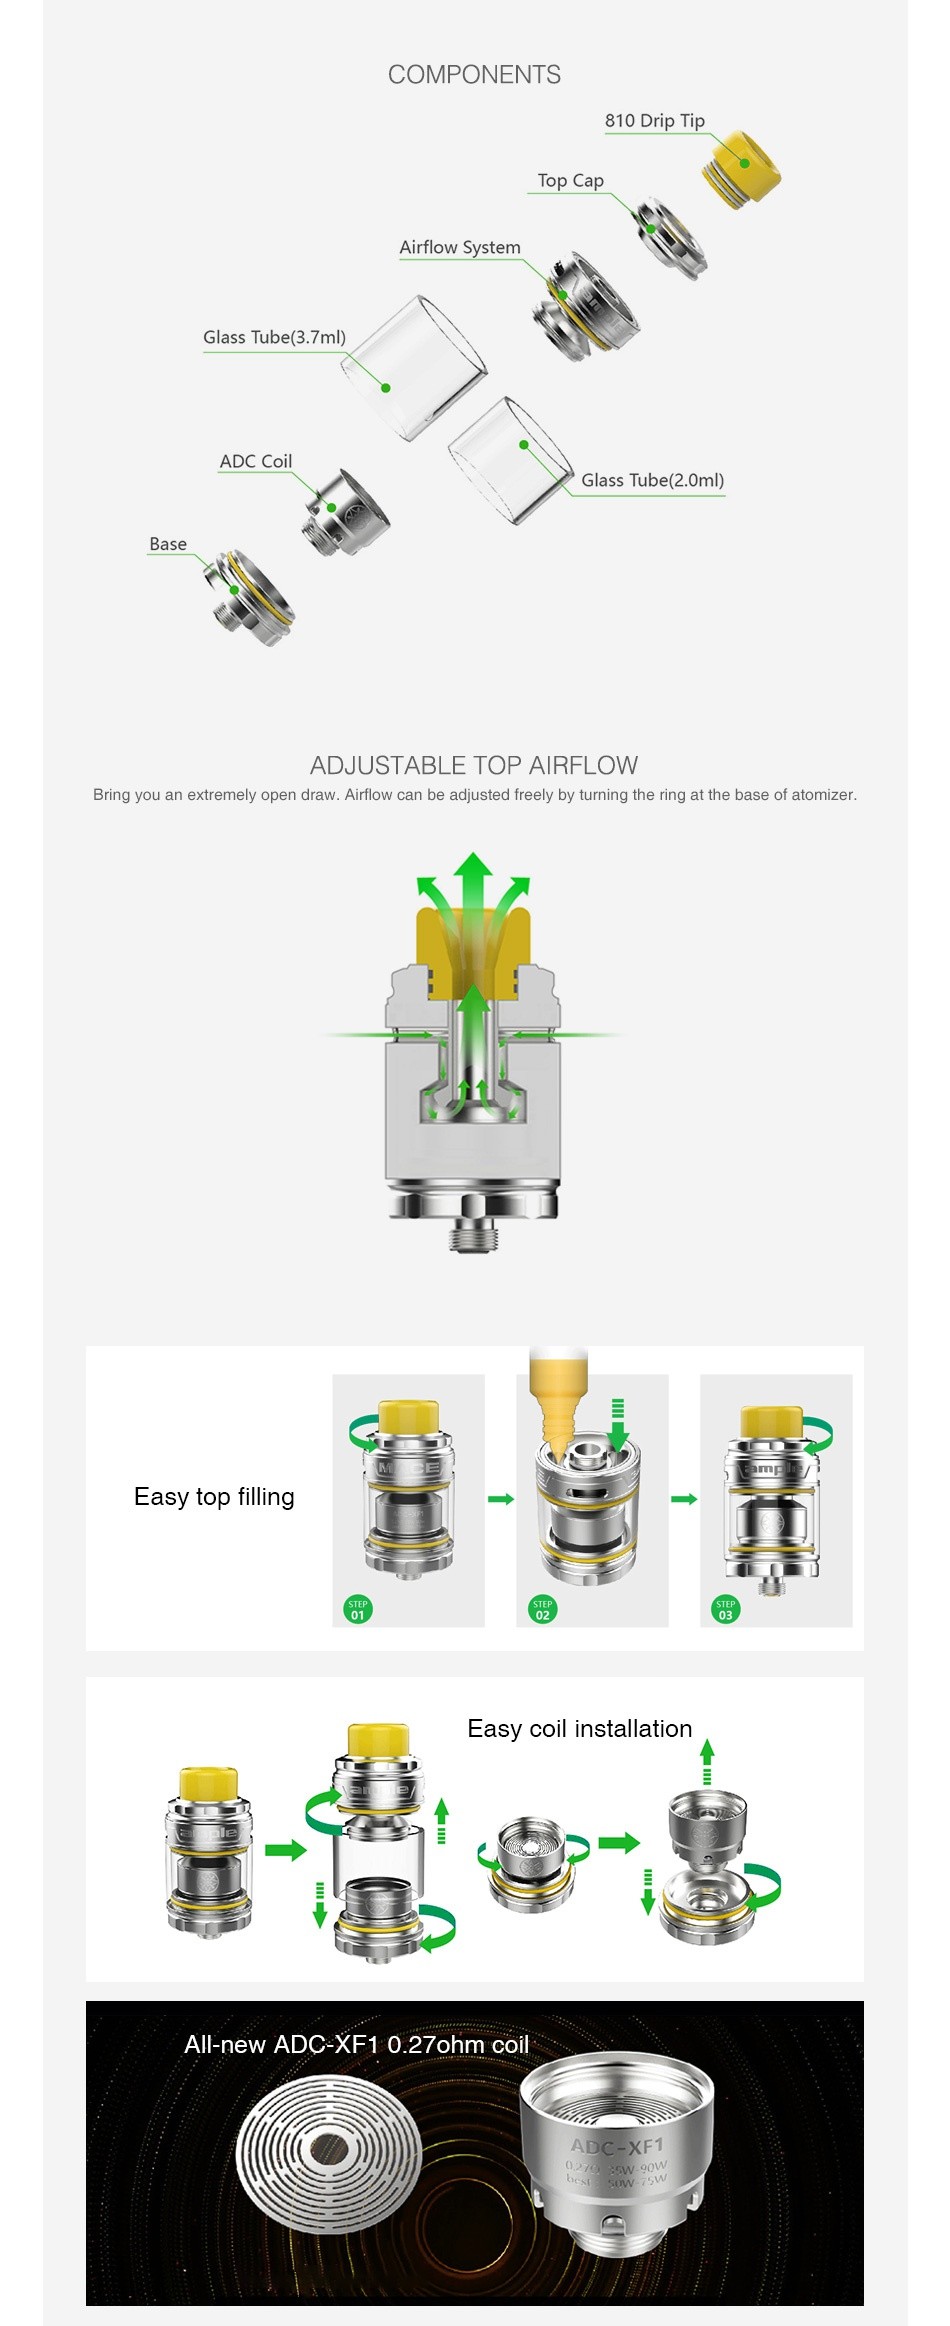 Ample Mace-X Subohm Tank 2ml/3.7ml COMPONENTS 810 Drip Ti Airflow System Glass Tube 3 7ml ADC CO Glass Tube 2 0m  ADJUSTABLE TOP AIRFLOW Bring you an extremely open draw  Airflow can be adjusted freely by turnng the ring at the base of atomizer  Easy top filling Easy coil installation All new ADc XF1 0 27ohm coil